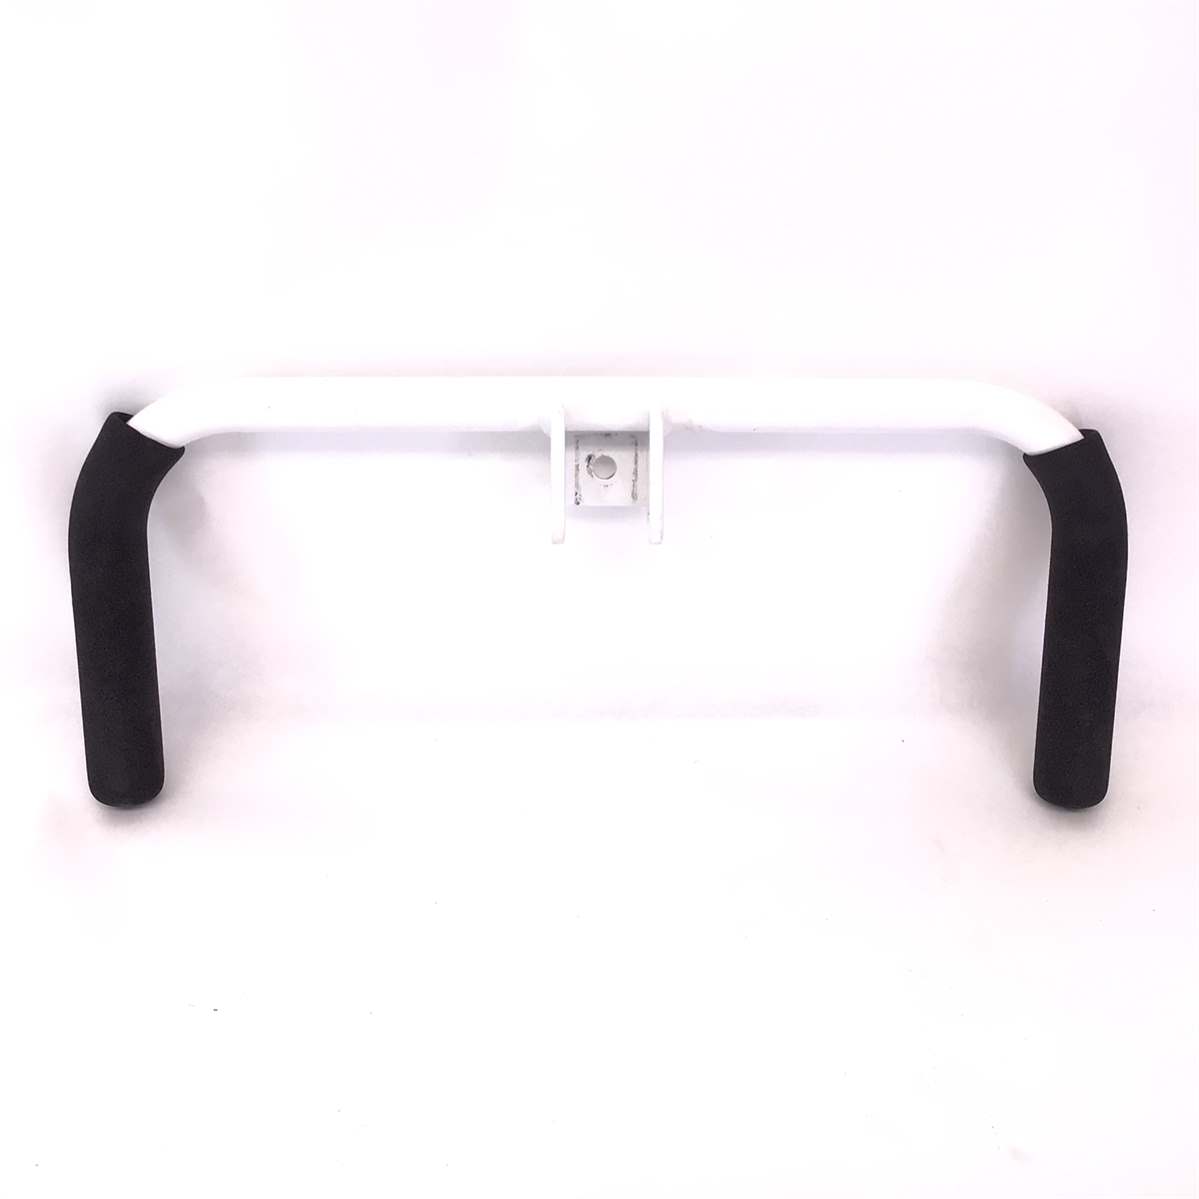 Leg Curl Extension Handle Assembly (Used)